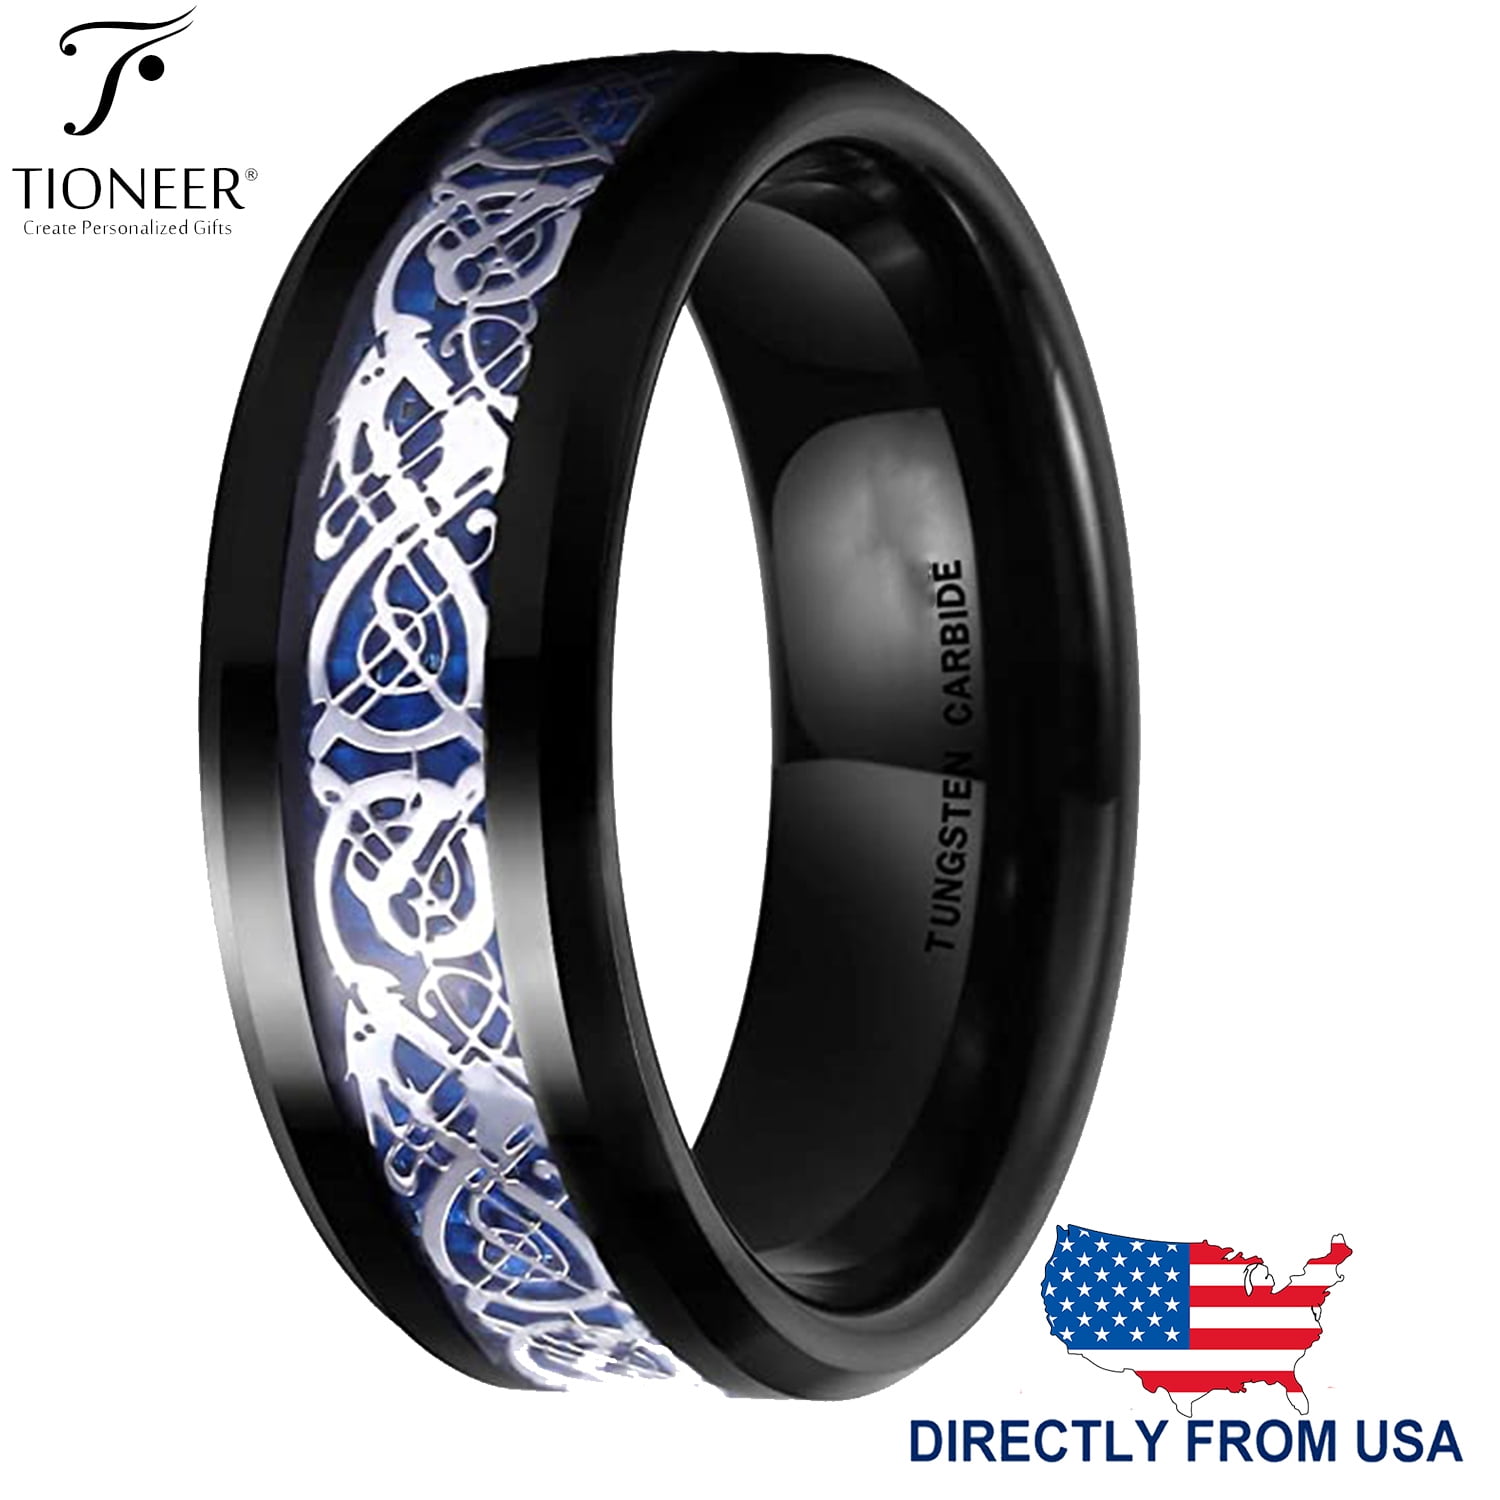 iTungsten 6mm 8mm Black Tungsten Carbide Rings for Men Women Wedding Bands Celtic Dragon Purple/Green/Red Carbon Fiber Inlay Beveled Edges Polished Comfort Fit 